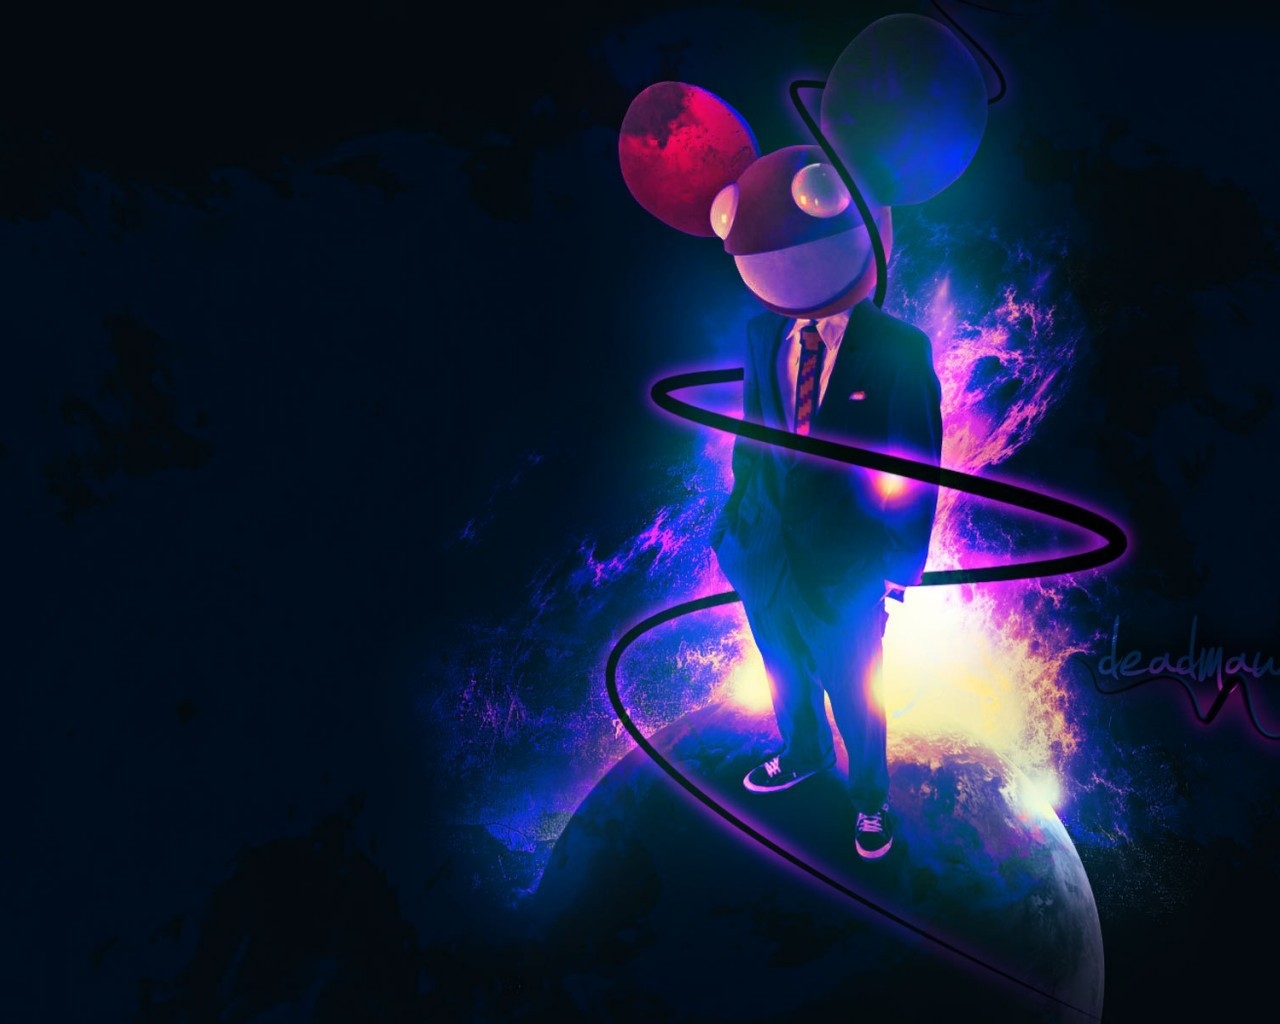 Deadmau5 Poster for 1280 x 1024 resolution